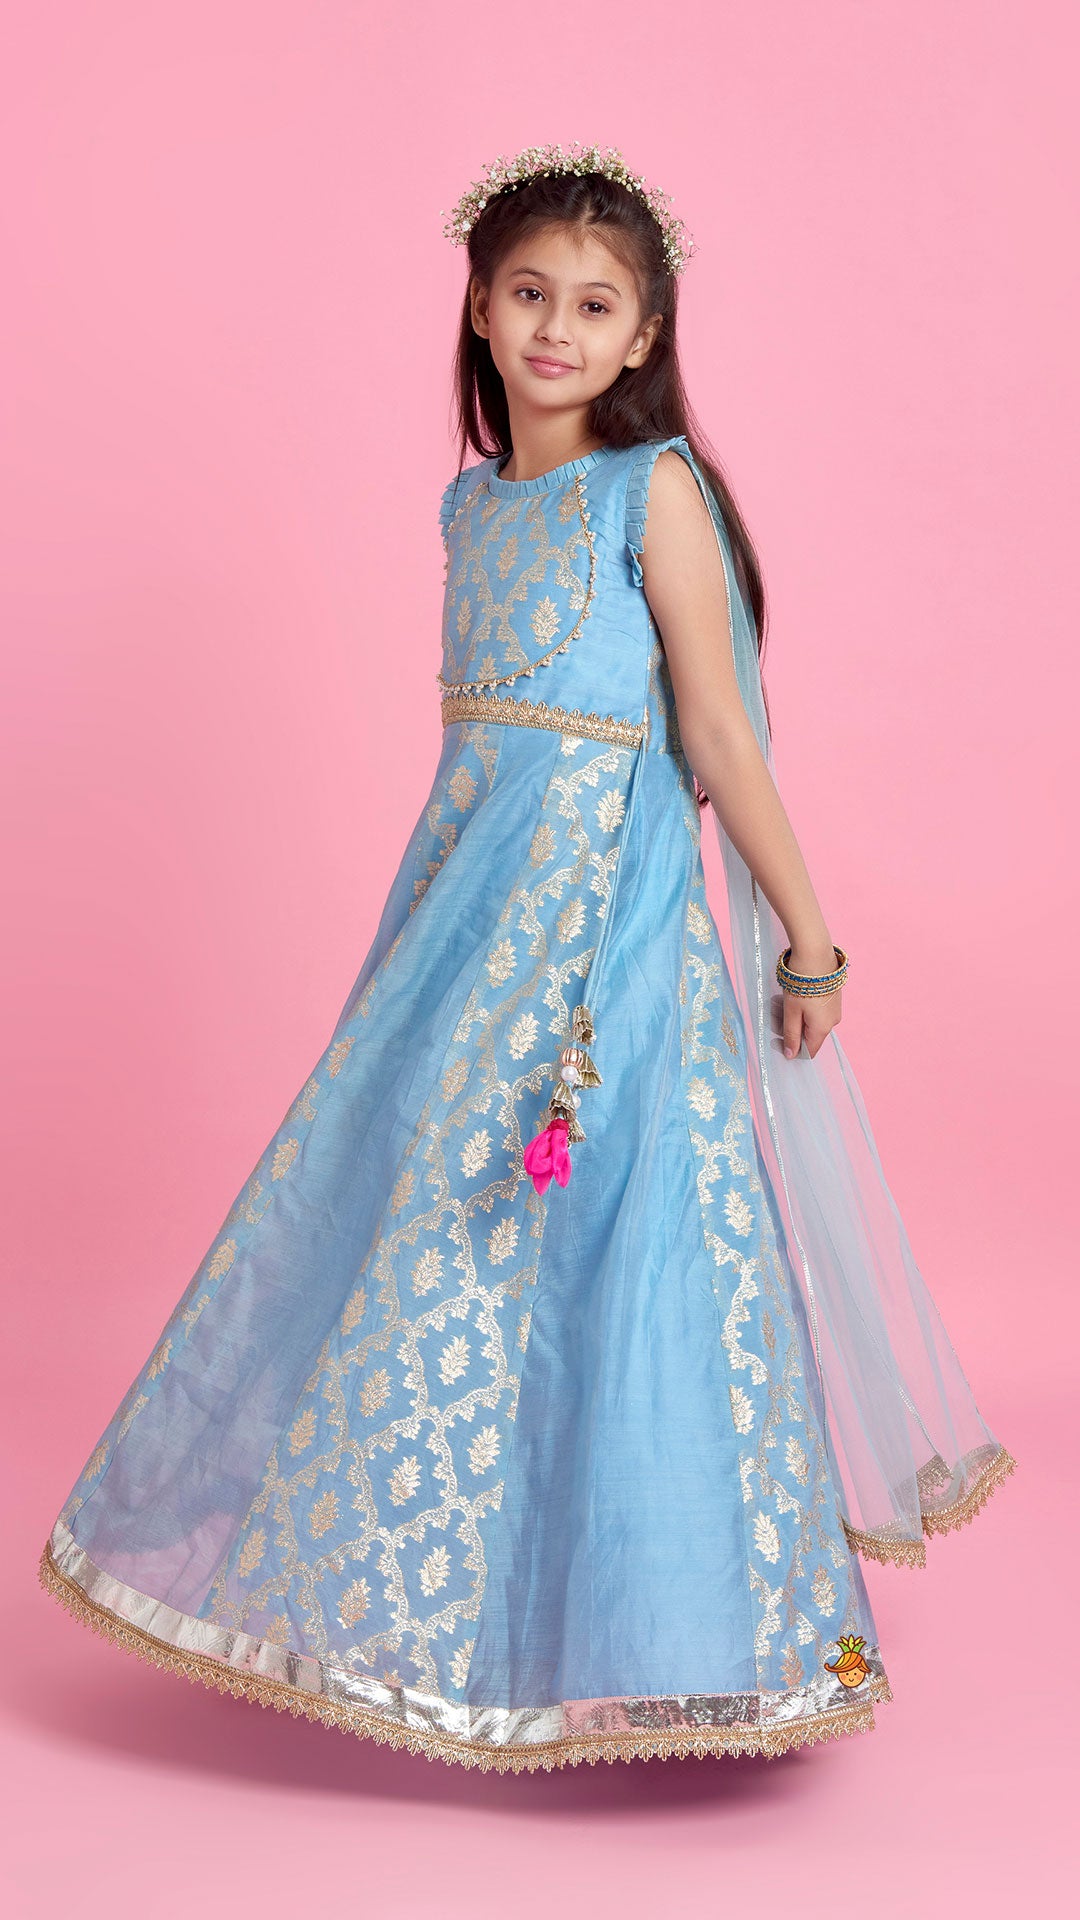 Zari Brocade Embroidered Lace Work Dress With Attached Drape Dupatta